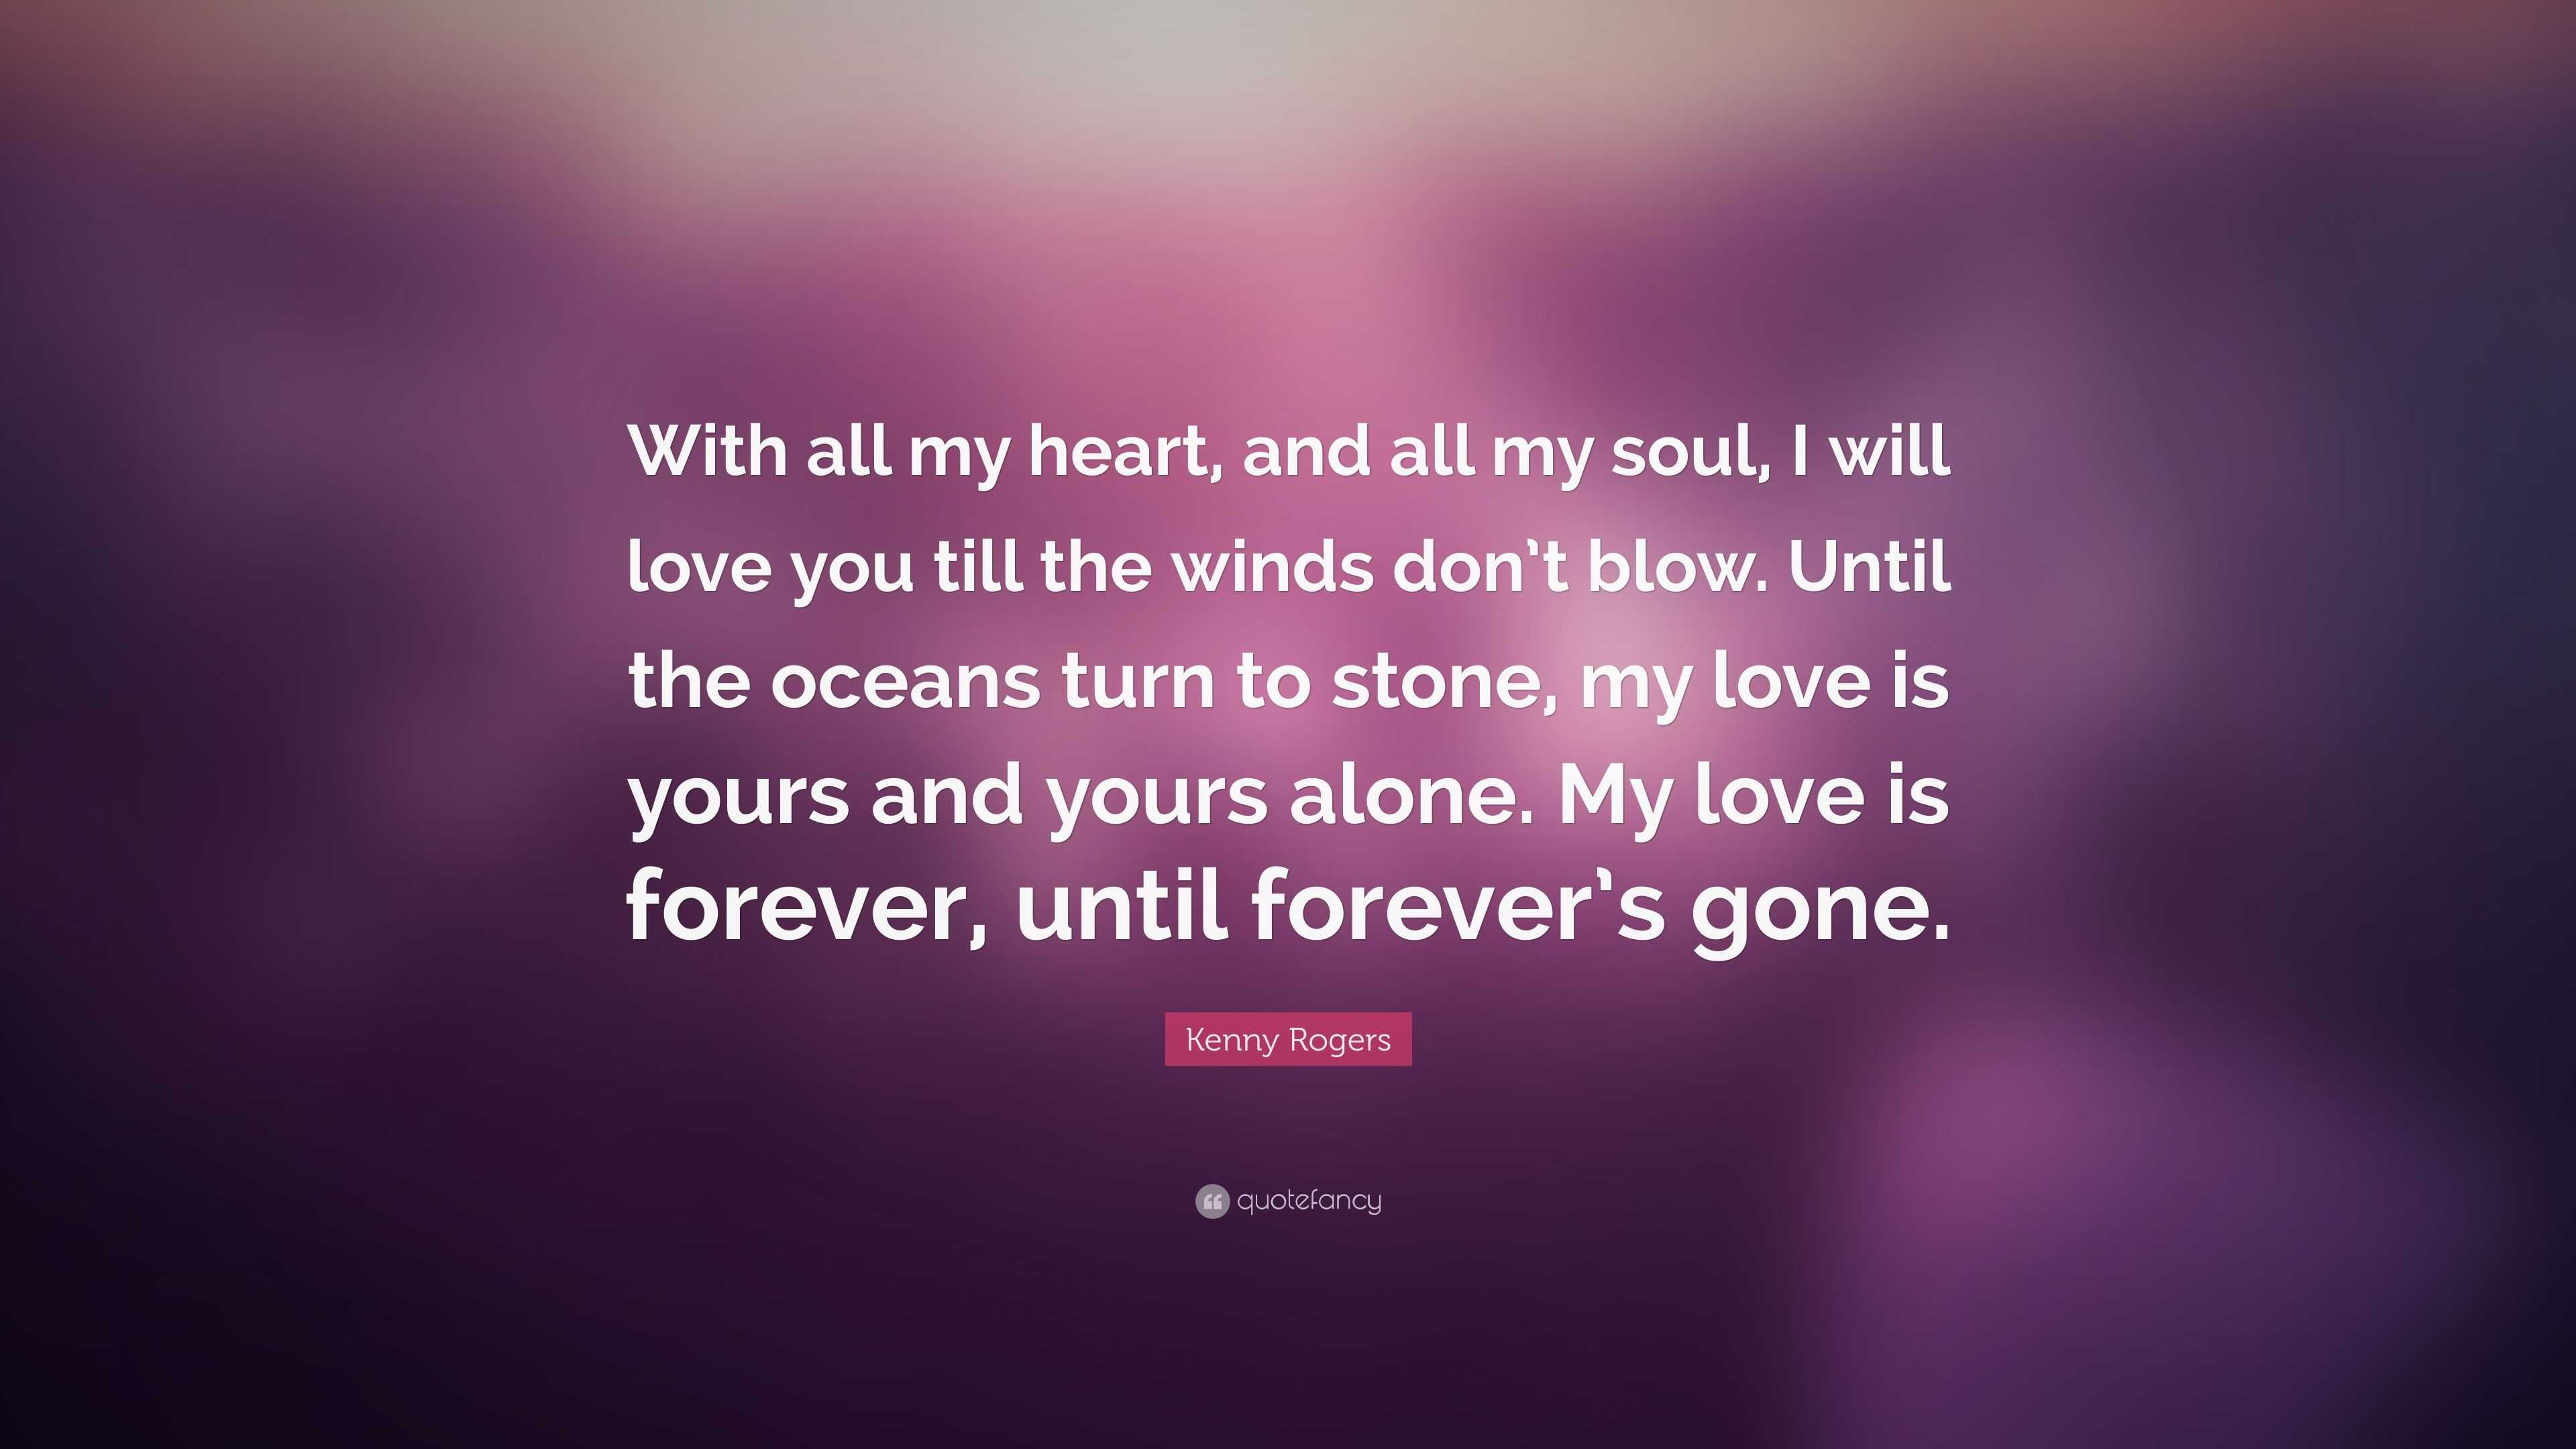 Kenny Rogers Quote: “With all my heart, and all my soul, I will love you  till the winds don't blow. Until the oceans turn to stone, my love i...”